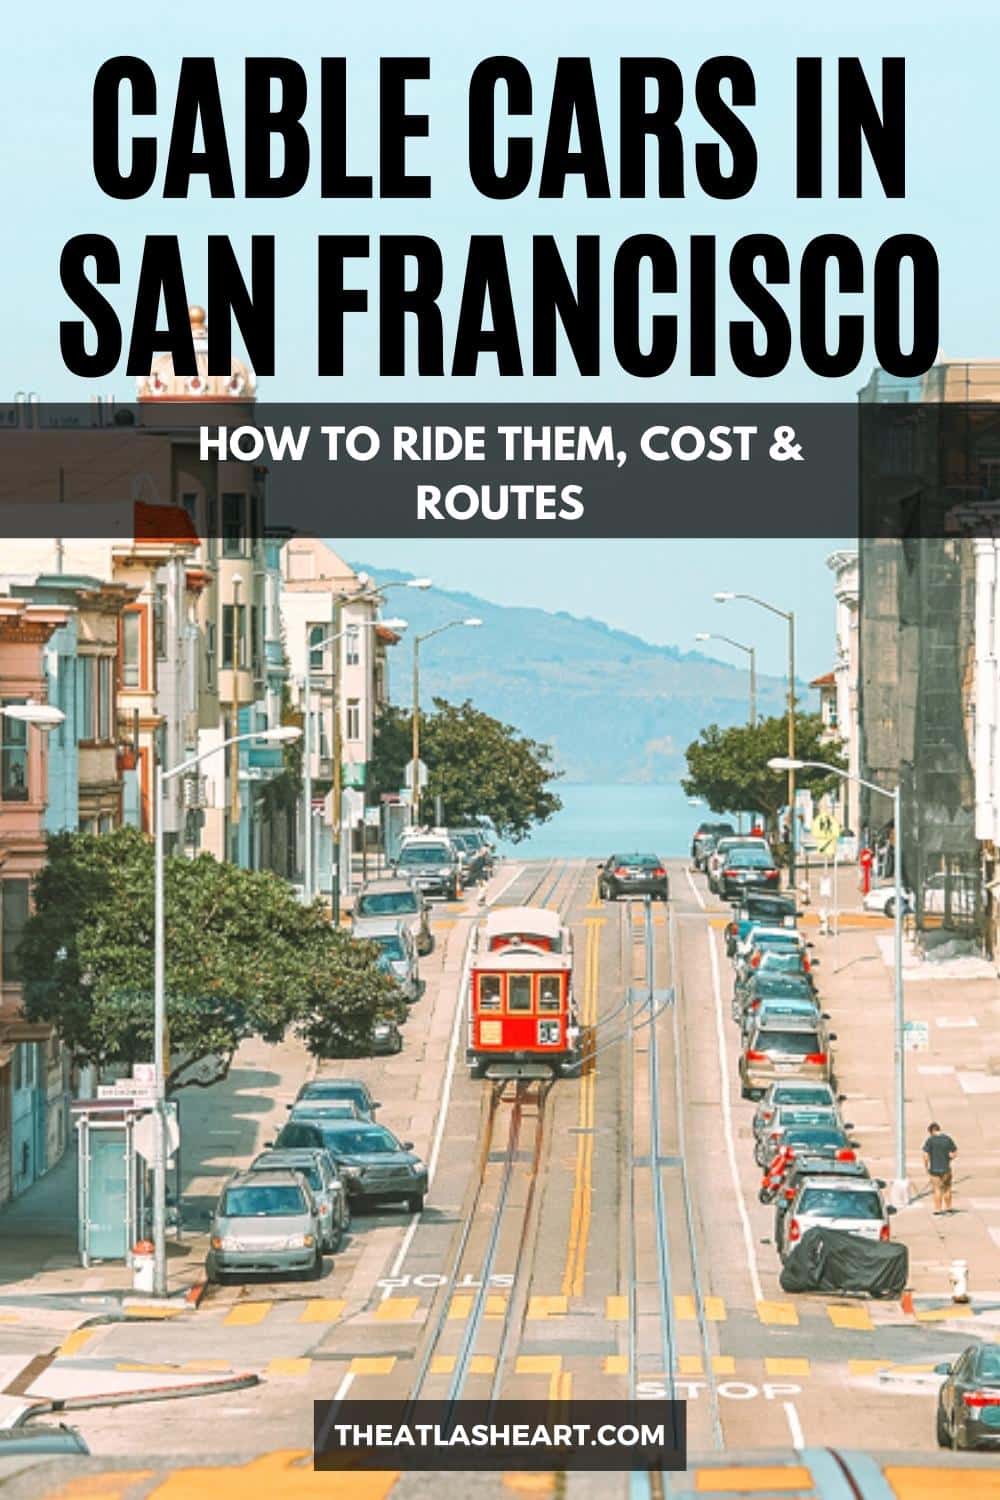 A Guide to Cable Cars in San Francisco: How to Ride Them, Cost & Routes